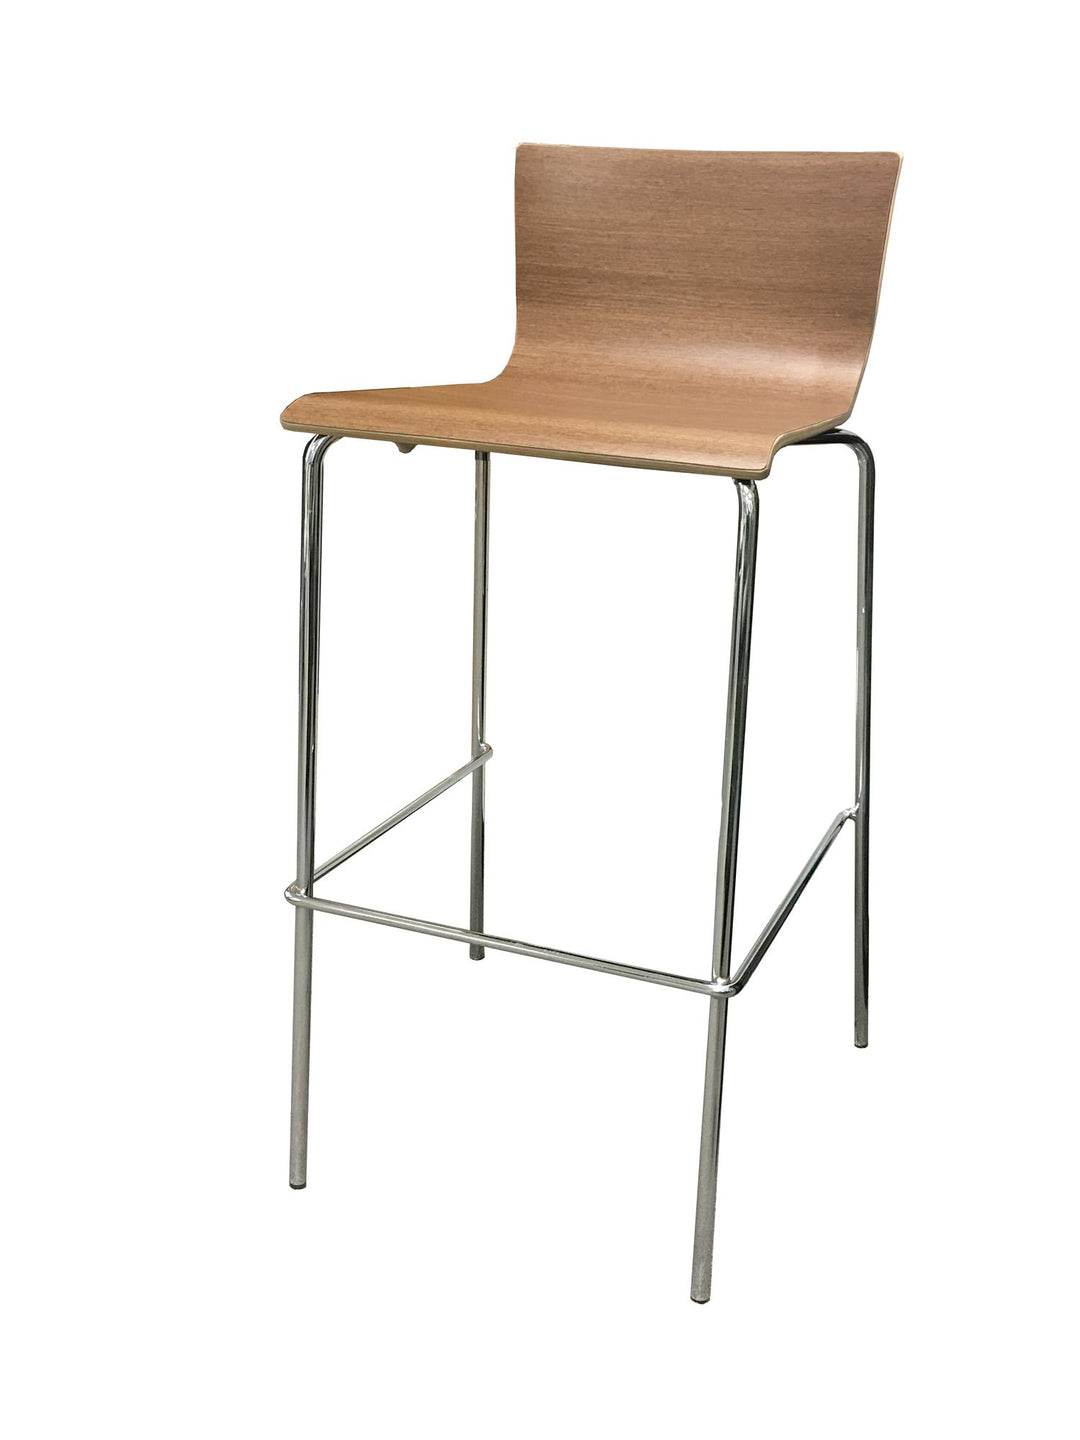 Voyance 30" Wood Seat Barstool with Chrome Legs, Set of 2  -  Brown